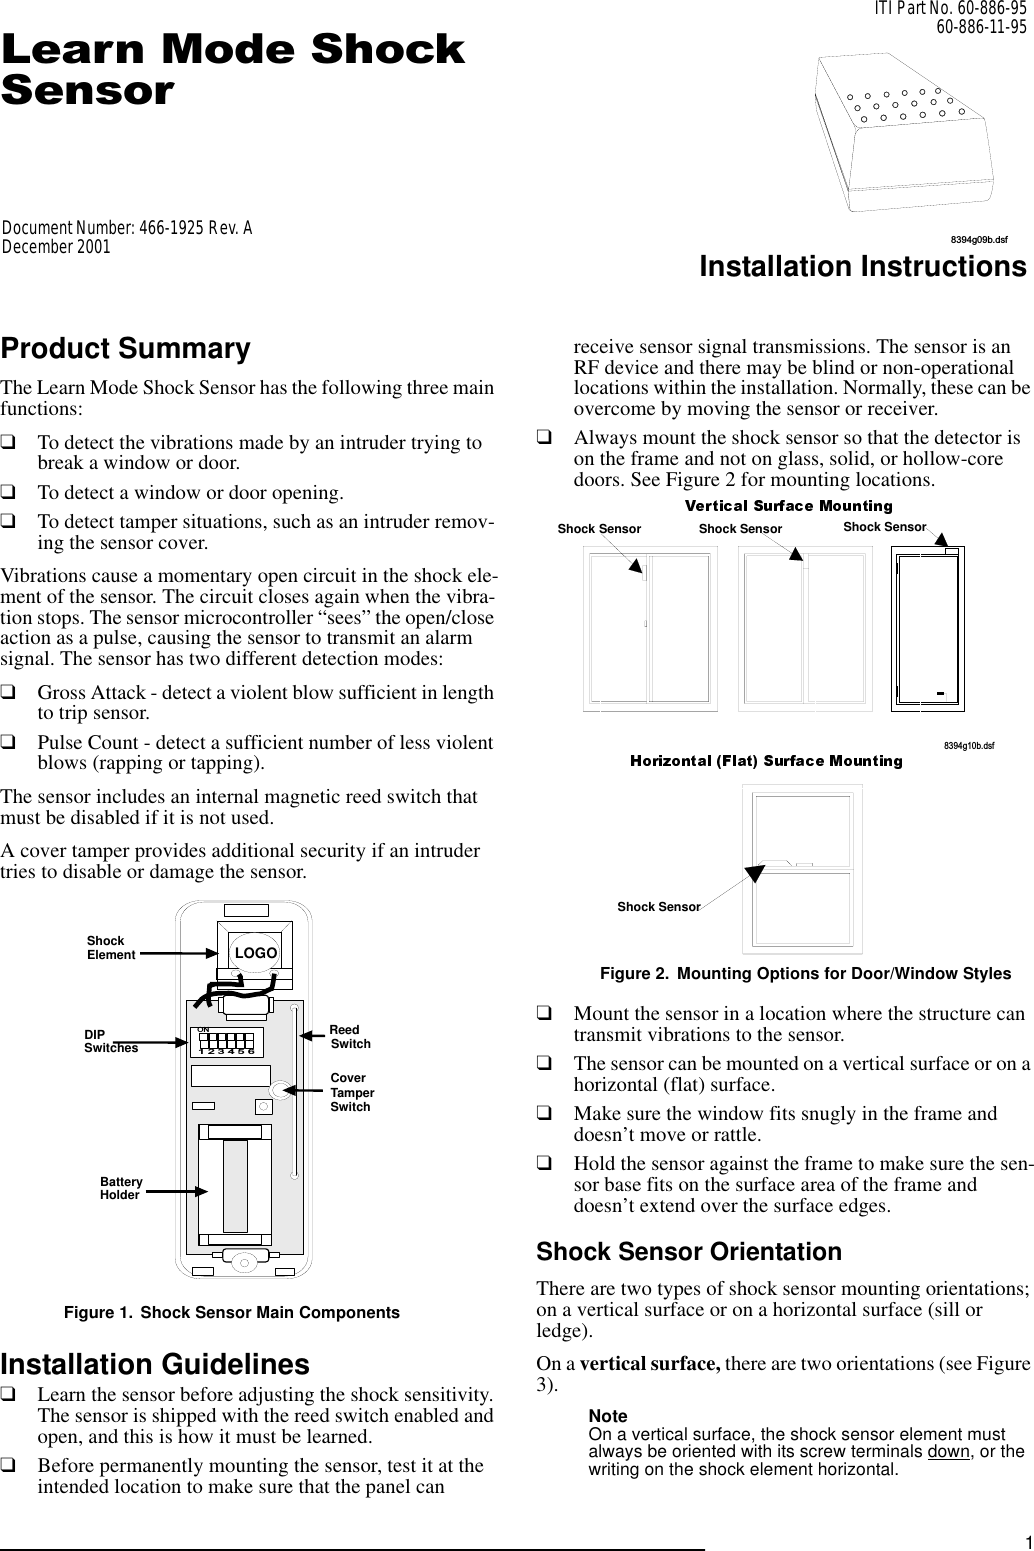 8394g09b.dsf1/HDUQ0RGH6KRFN6HQVRUITI Part No. 60-886-9560-886-11-95Installation InstructionsProduct SummaryThe Learn Mode Shock Sensor has the following three main functions:❑To detect the vibrations made by an intruder trying to break a window or door.❑To detect a window or door opening.❑To detect tamper situations, such as an intruder remov-ing the sensor cover.Vibrations cause a momentary open circuit in the shock ele-ment of the sensor. The circuit closes again when the vibra-tion stops. The sensor microcontroller “sees” the open/close action as a pulse, causing the sensor to transmit an alarm signal. The sensor has two different detection modes:❑Gross Attack - detect a violent blow sufficient in length to trip sensor.❑Pulse Count - detect a sufficient number of less violent blows (rapping or tapping).The sensor includes an internal magnetic reed switch that must be disabled if it is not used.A cover tamper provides additional security if an intruder tries to disable or damage the sensor.Figure 1. Shock Sensor Main ComponentsInstallation Guidelines❑Learn the sensor before adjusting the shock sensitivity. The sensor is shipped with the reed switch enabled and open, and this is how it must be learned.❑Before permanently mounting the sensor, test it at the intended location to make sure that the panel can receive sensor signal transmissions. The sensor is an RF device and there may be blind or non-operational locations within the installation. Normally, these can be overcome by moving the sensor or receiver. ❑Always mount the shock sensor so that the detector is on the frame and not on glass, solid, or hollow-core doors. See Figure 2 for mounting locations.Figure 2. Mounting Options for Door/Window Styles❑Mount the sensor in a location where the structure can transmit vibrations to the sensor.❑The sensor can be mounted on a vertical surface or on a horizontal (flat) surface.❑Make sure the window fits snugly in the frame and doesn’t move or rattle.❑Hold the sensor against the frame to make sure the sen-sor base fits on the surface area of the frame and doesn’t extend over the surface edges.Shock Sensor OrientationThere are two types of shock sensor mounting orientations; on a vertical surface or on a horizontal surface (sill or ledge). On a vertical surface, there are two orientations (see Figure 3). Note On a vertical surface, the shock sensor element must always be oriented with its screw terminals down, or the writing on the shock element horizontal.1   2   3   4   5   6O NReedSwitchCoverTamperSwitchBatteryHolderShock ElementDIPSwitchesLOGO8 3 9 4 g 1 0 b . d s fShock SensorShock Sensor Shock Sensor Shock SensorDocument Number: 466-1925 Rev. ADecember 2001